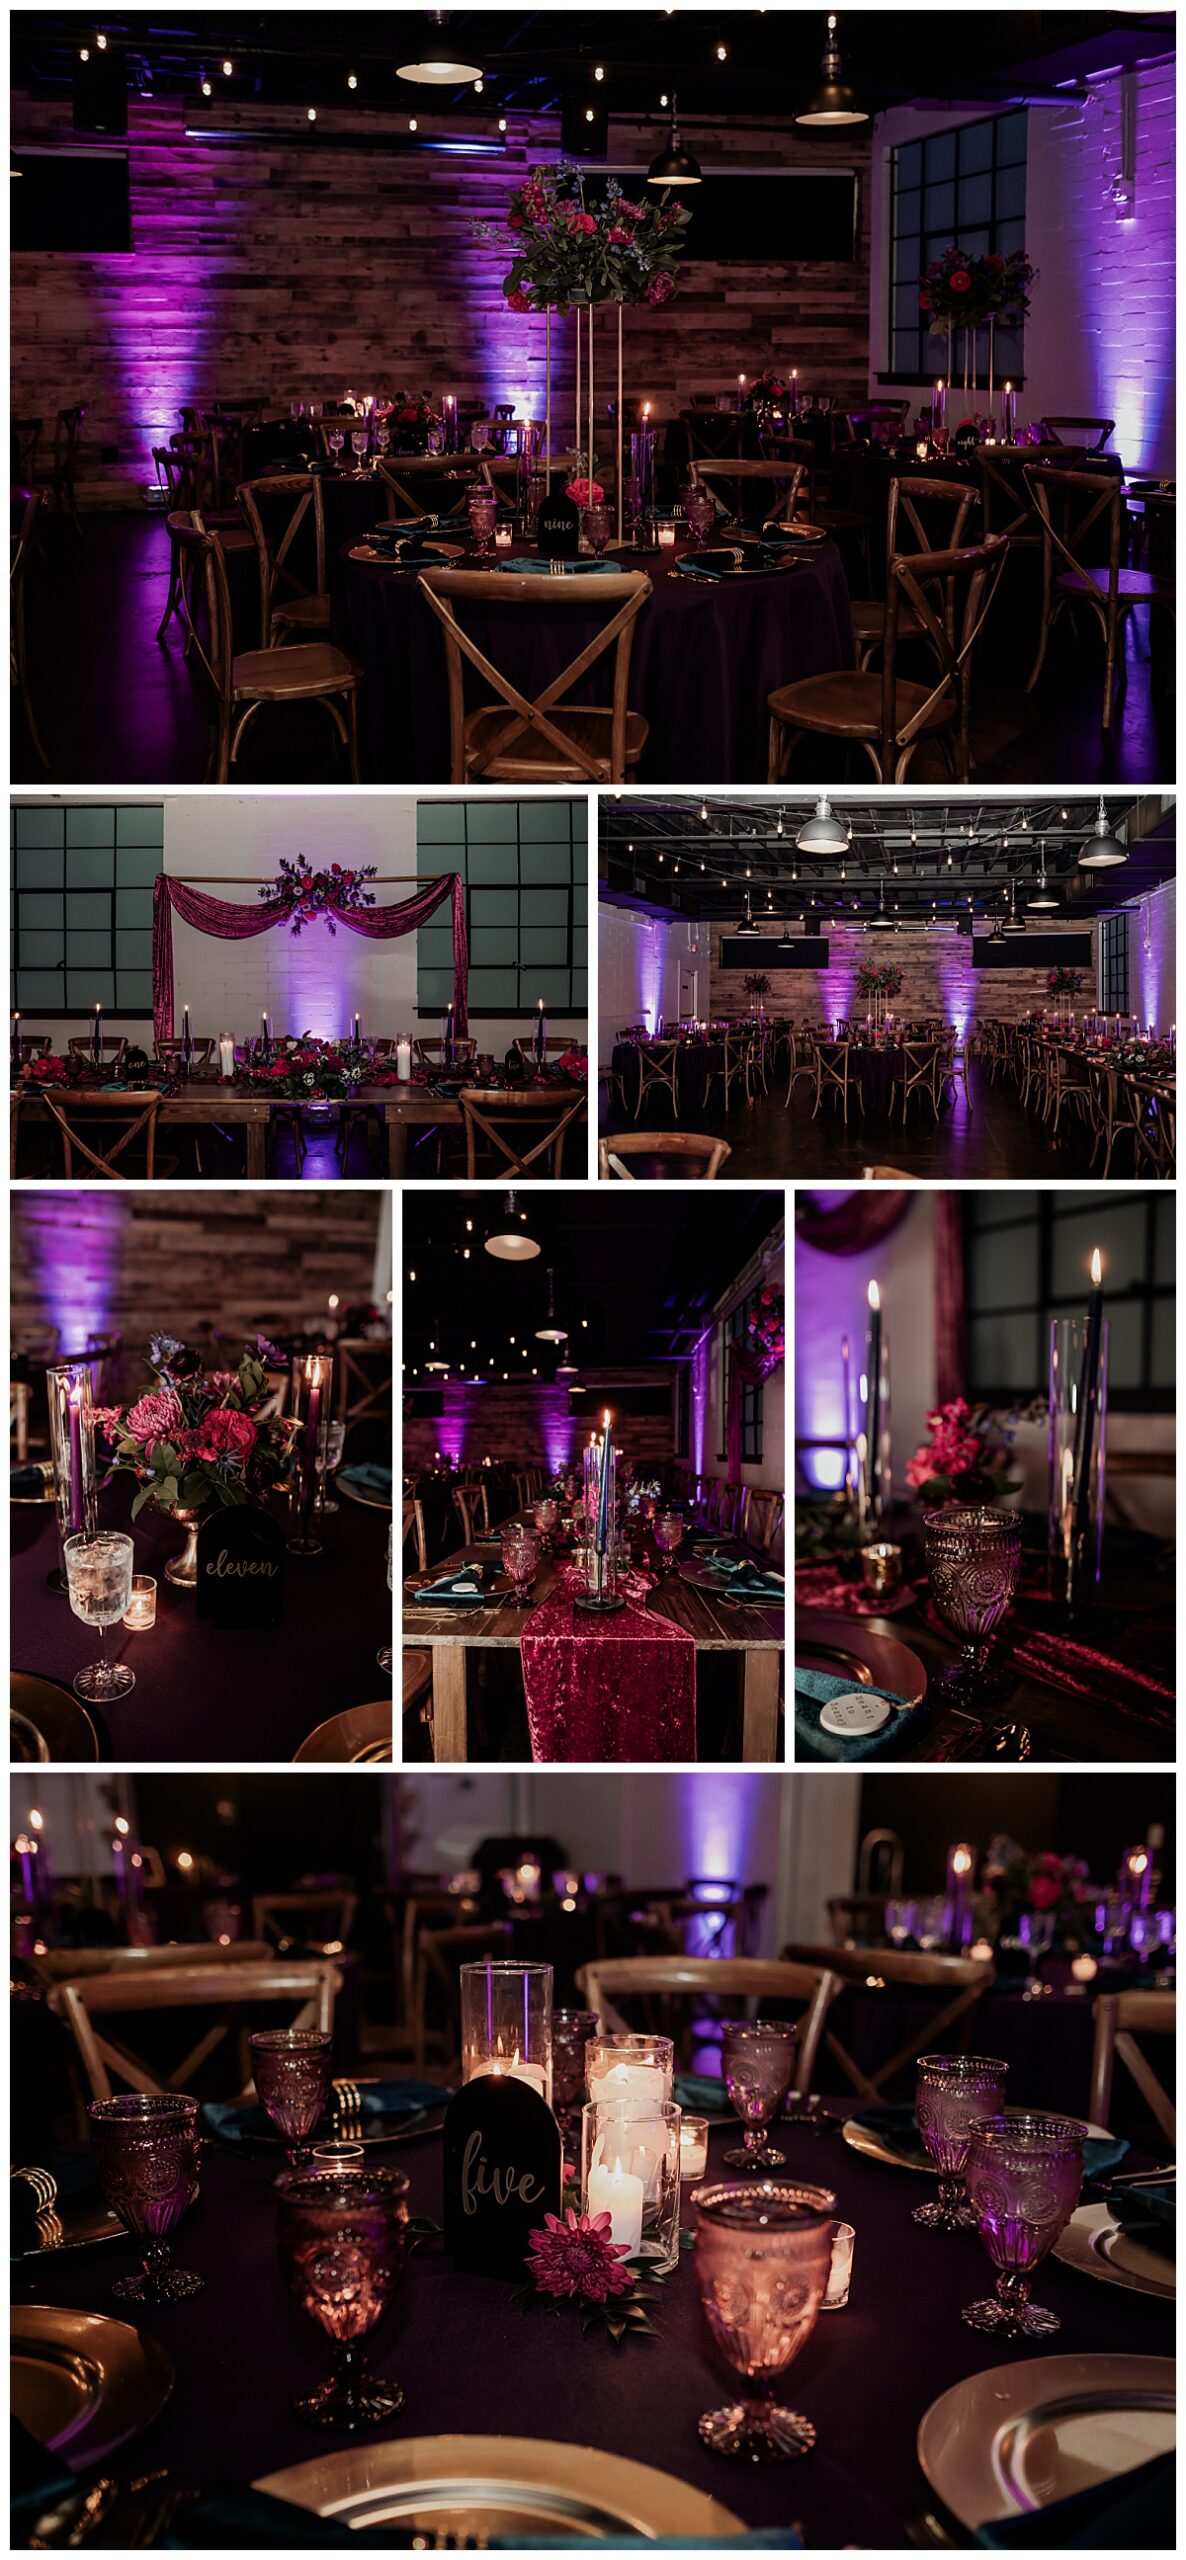 Wedding reception at The West Events in Madeira Beach, FL.